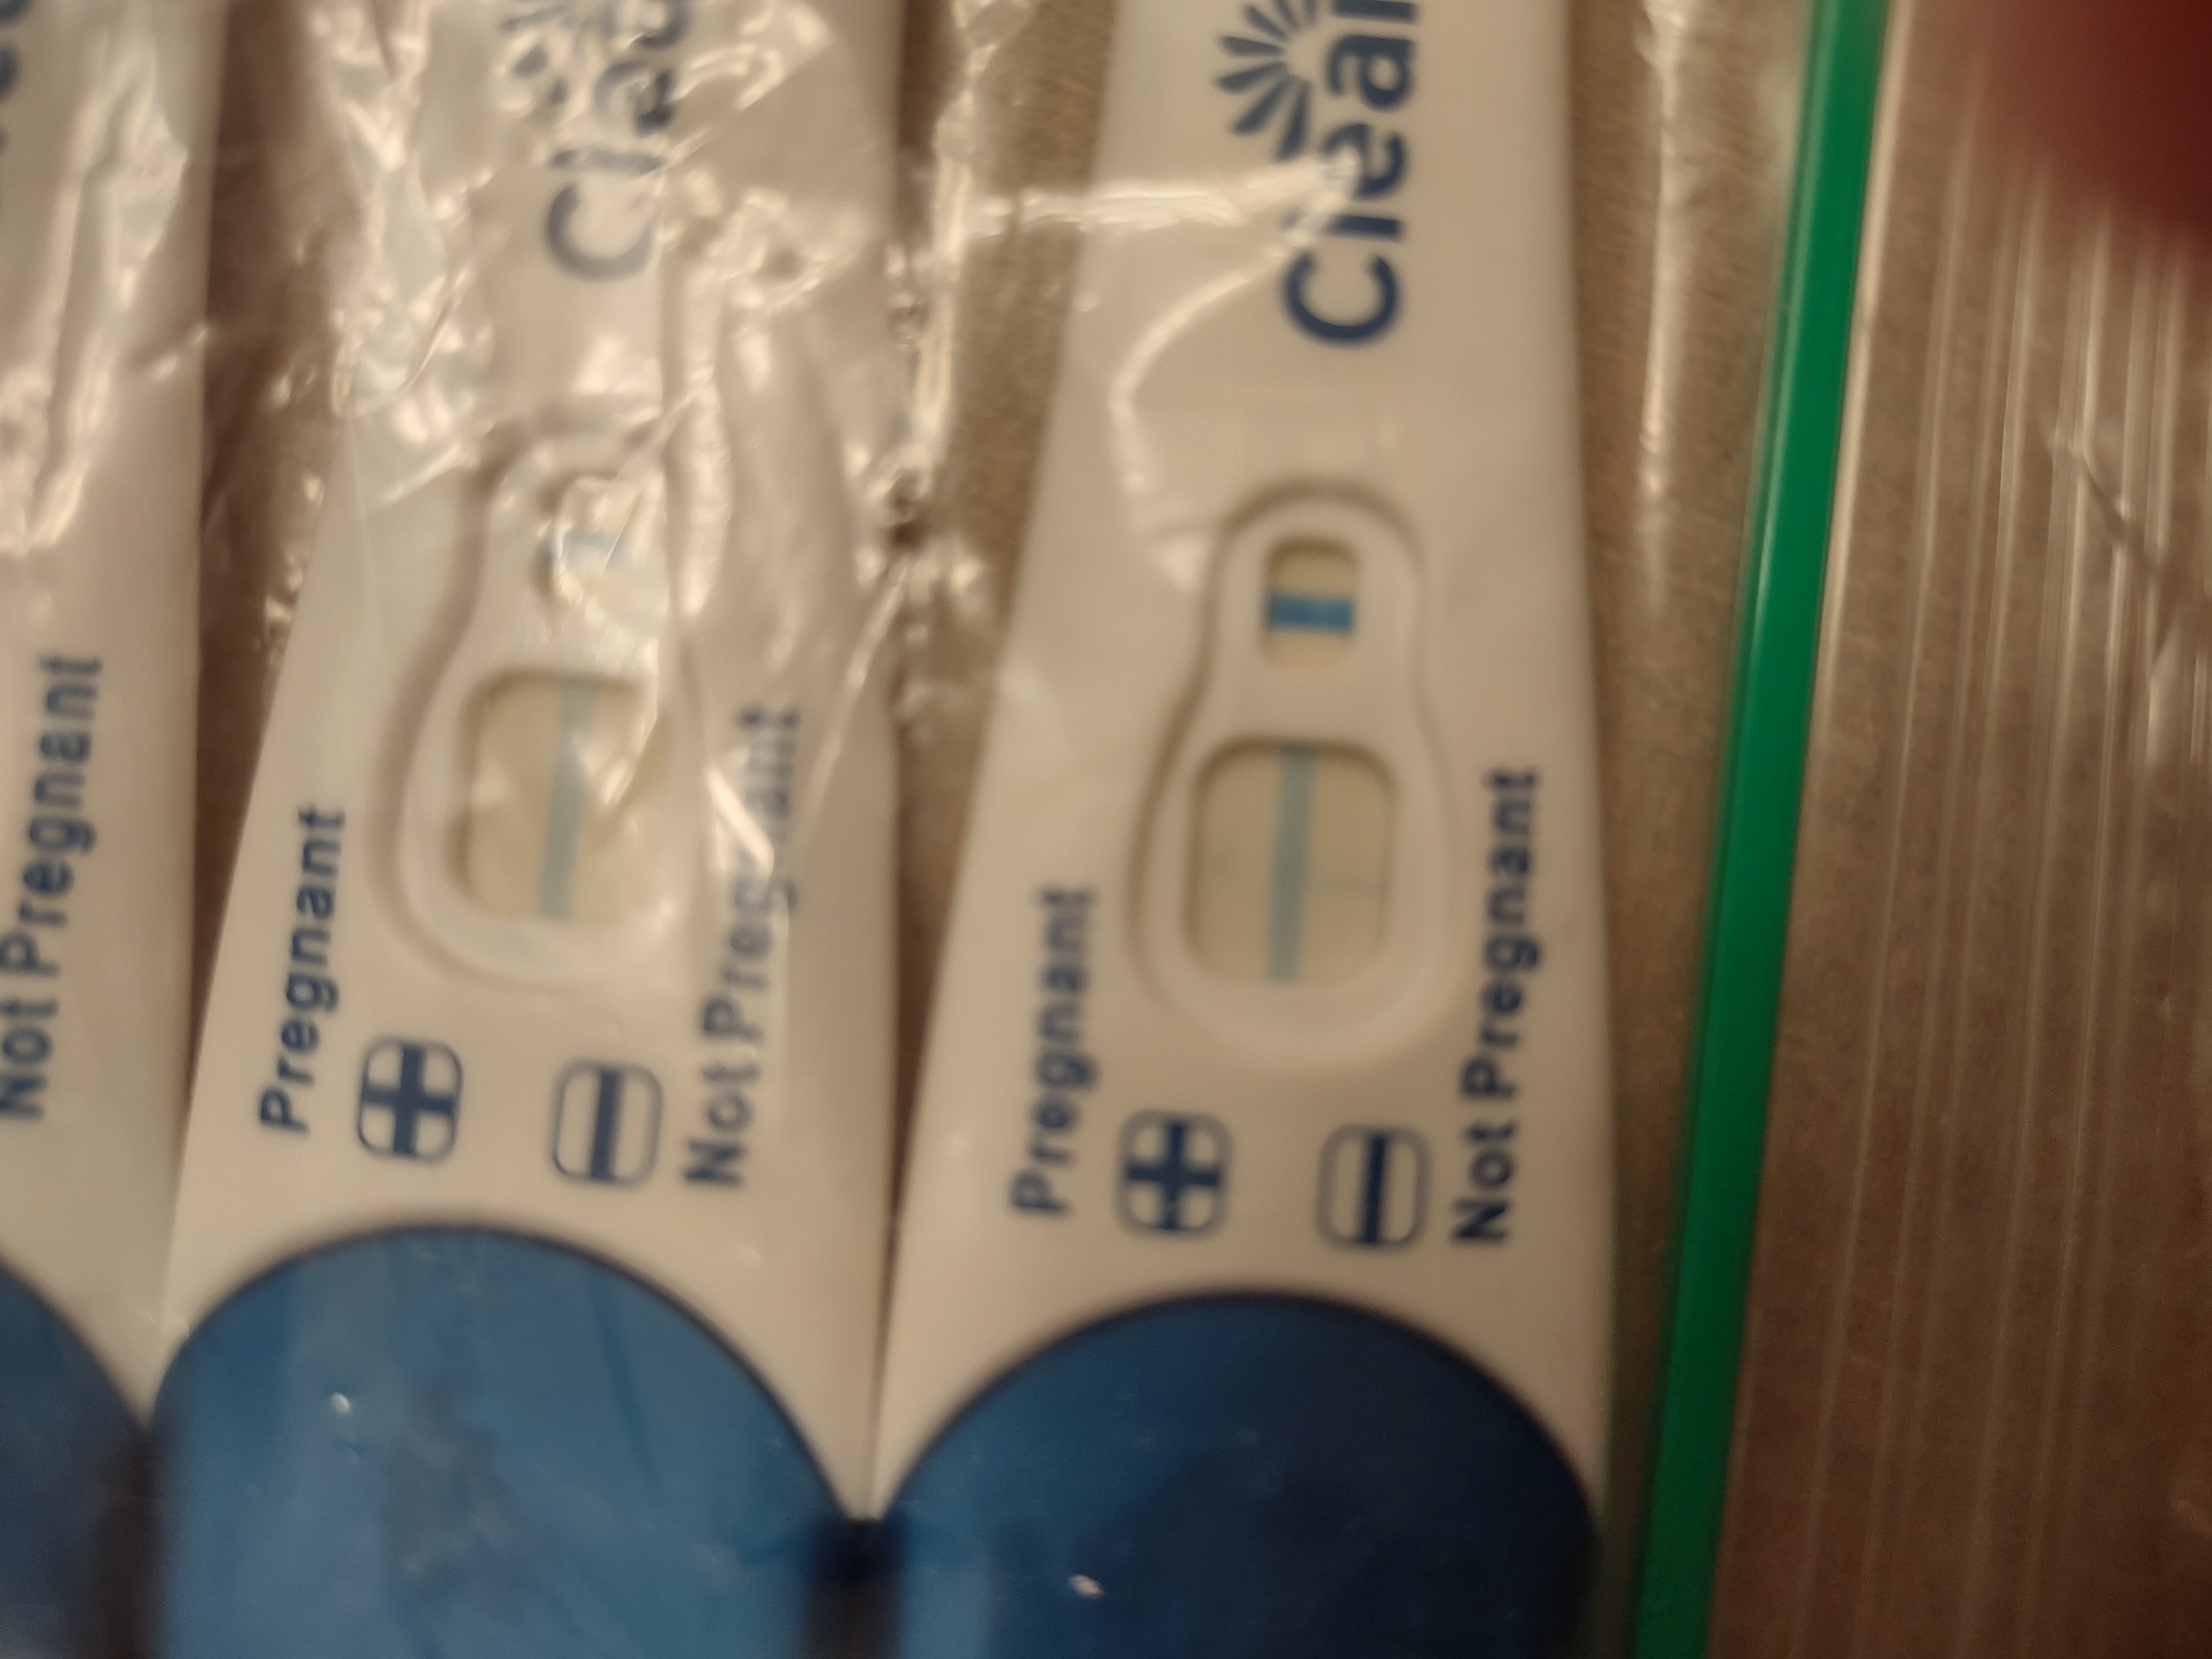 Help 45 days late mixed pregnancy test